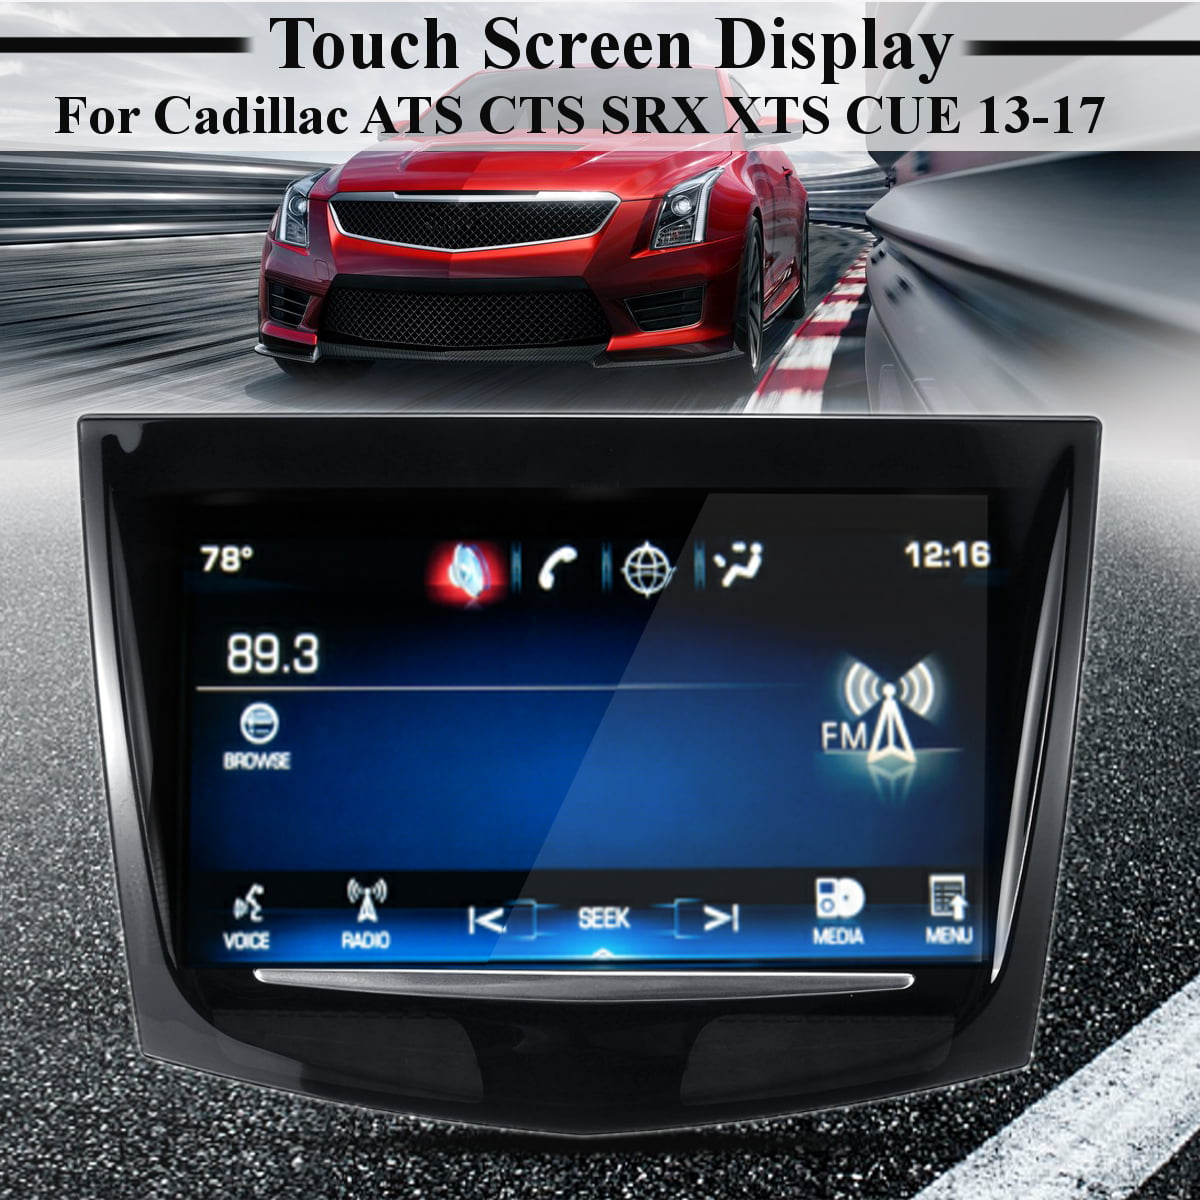 AUTOKAY Touch Screen Display for 2013-2017 Cadillac ATS CTS SRX XTS CUE TouchSense